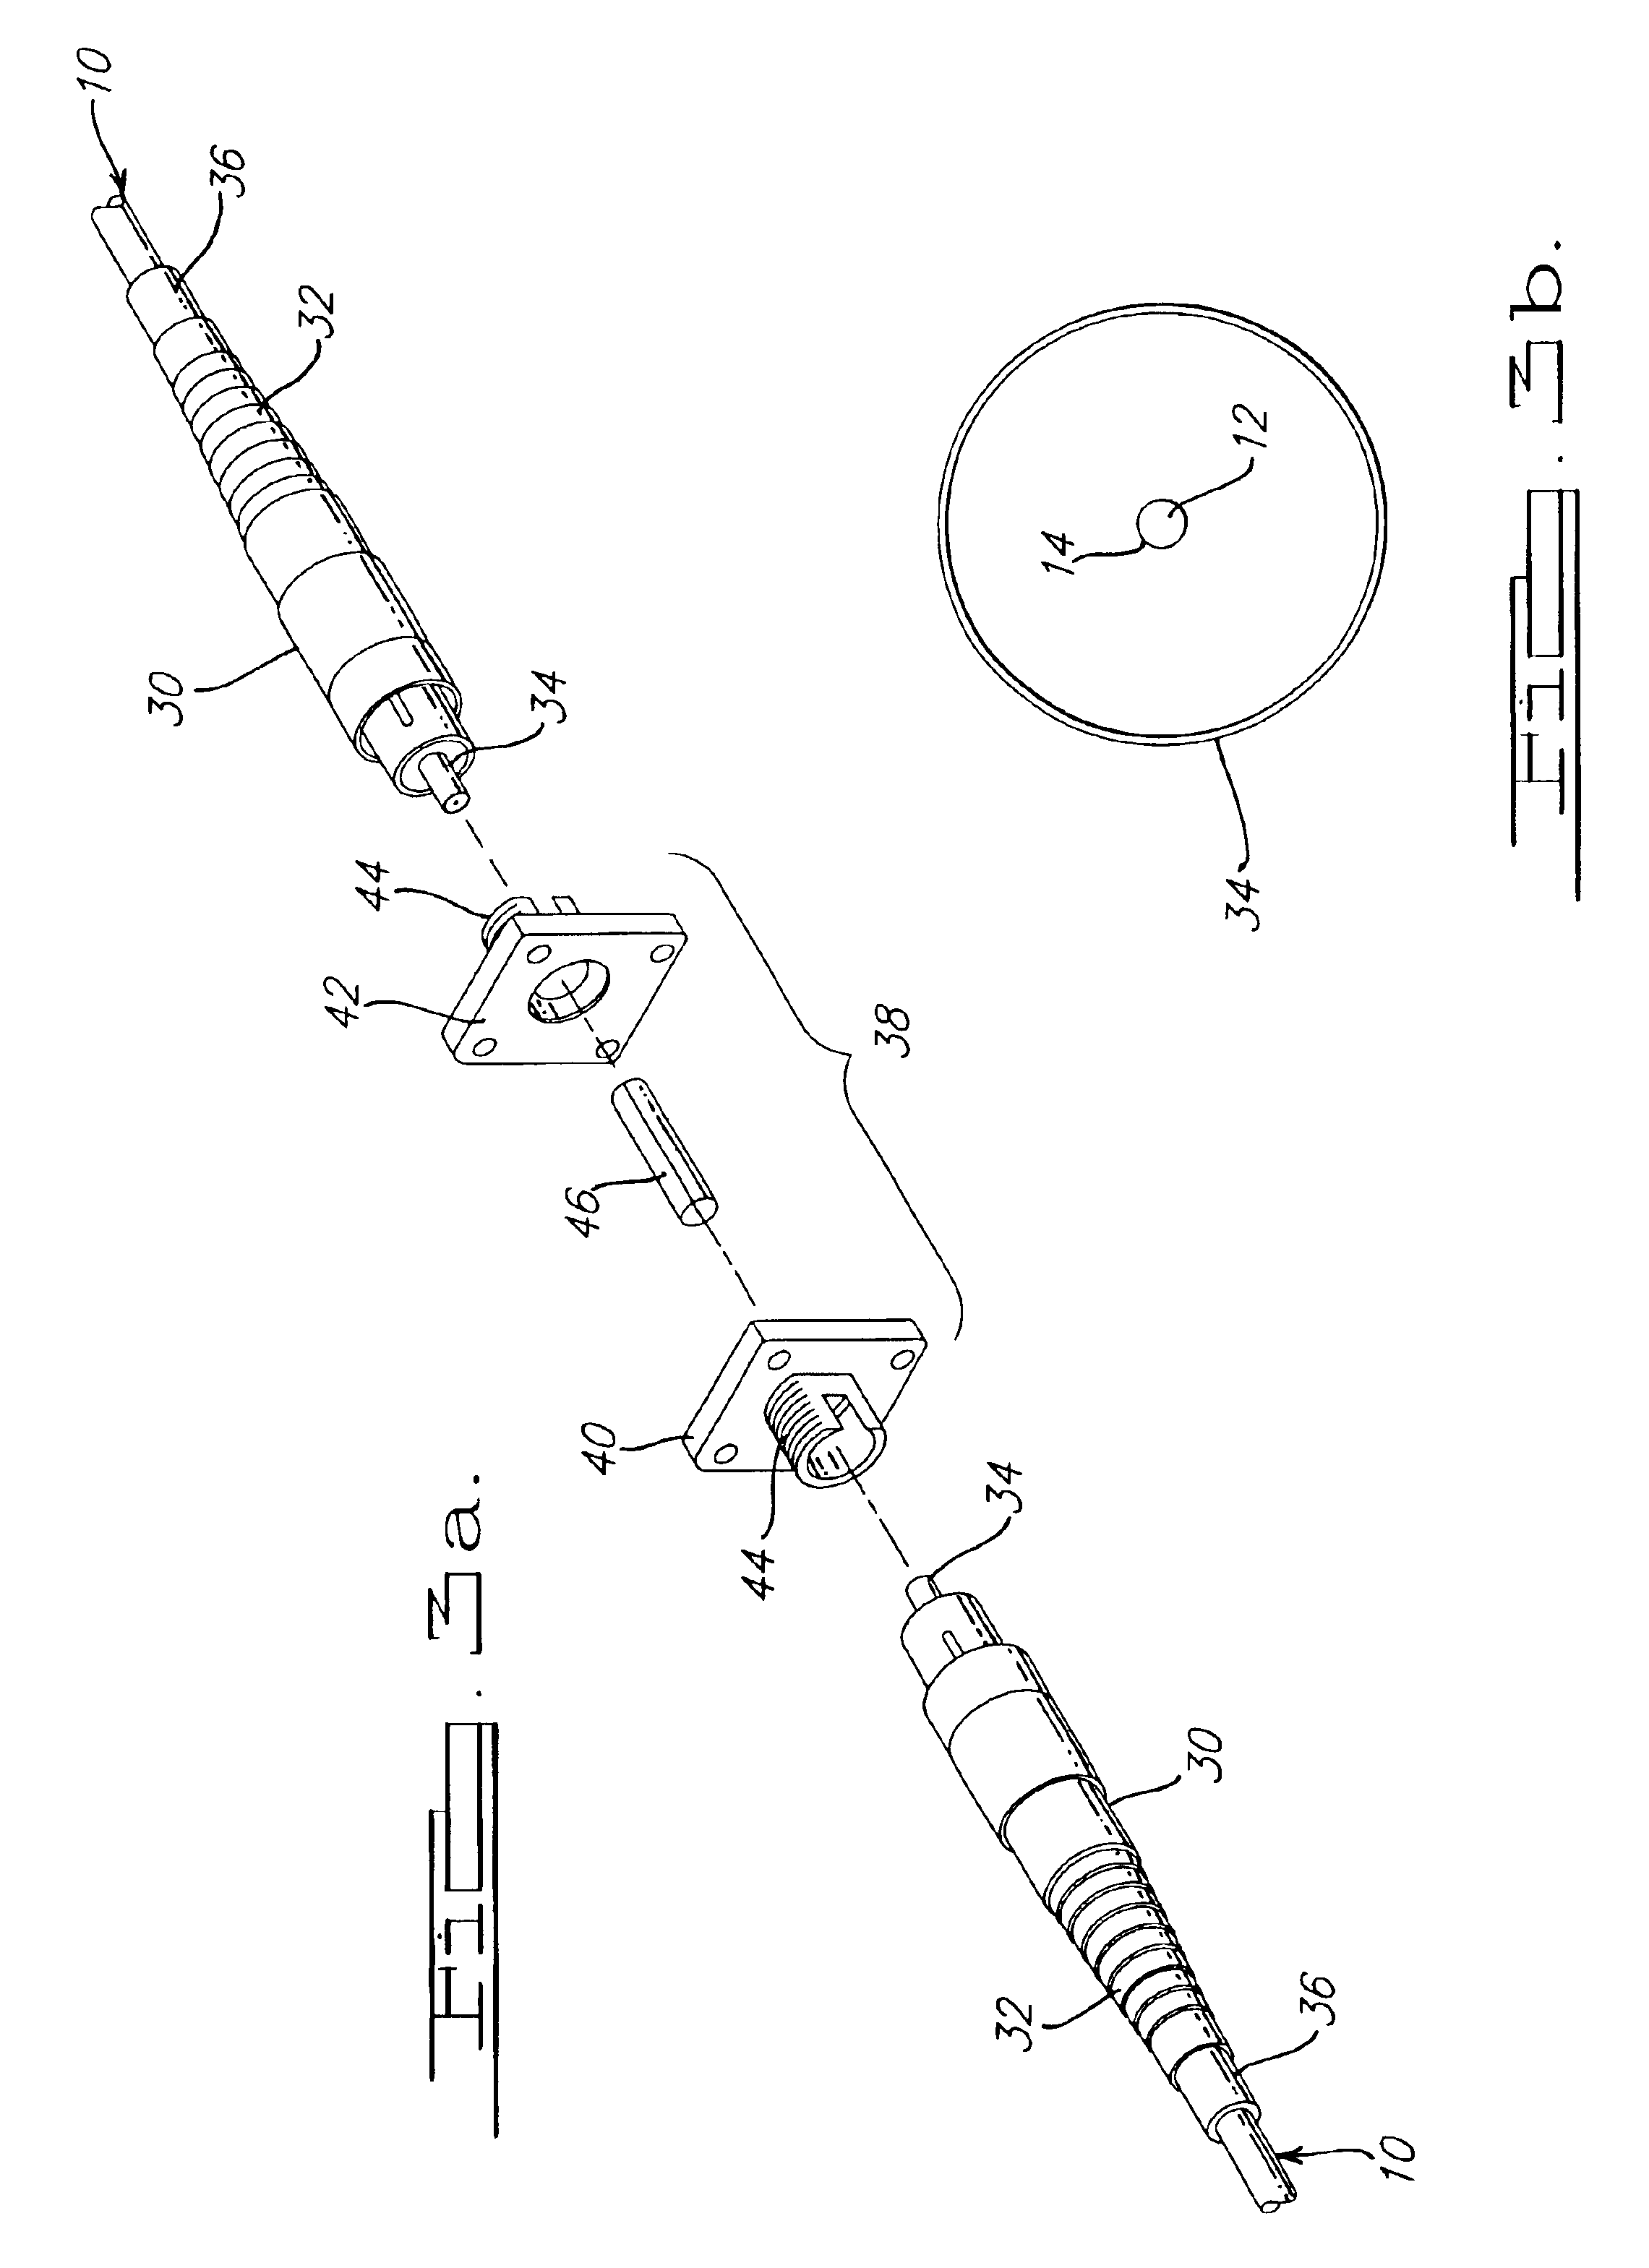 Method for audibly measuring optical efficiency in an installed fiber optic link